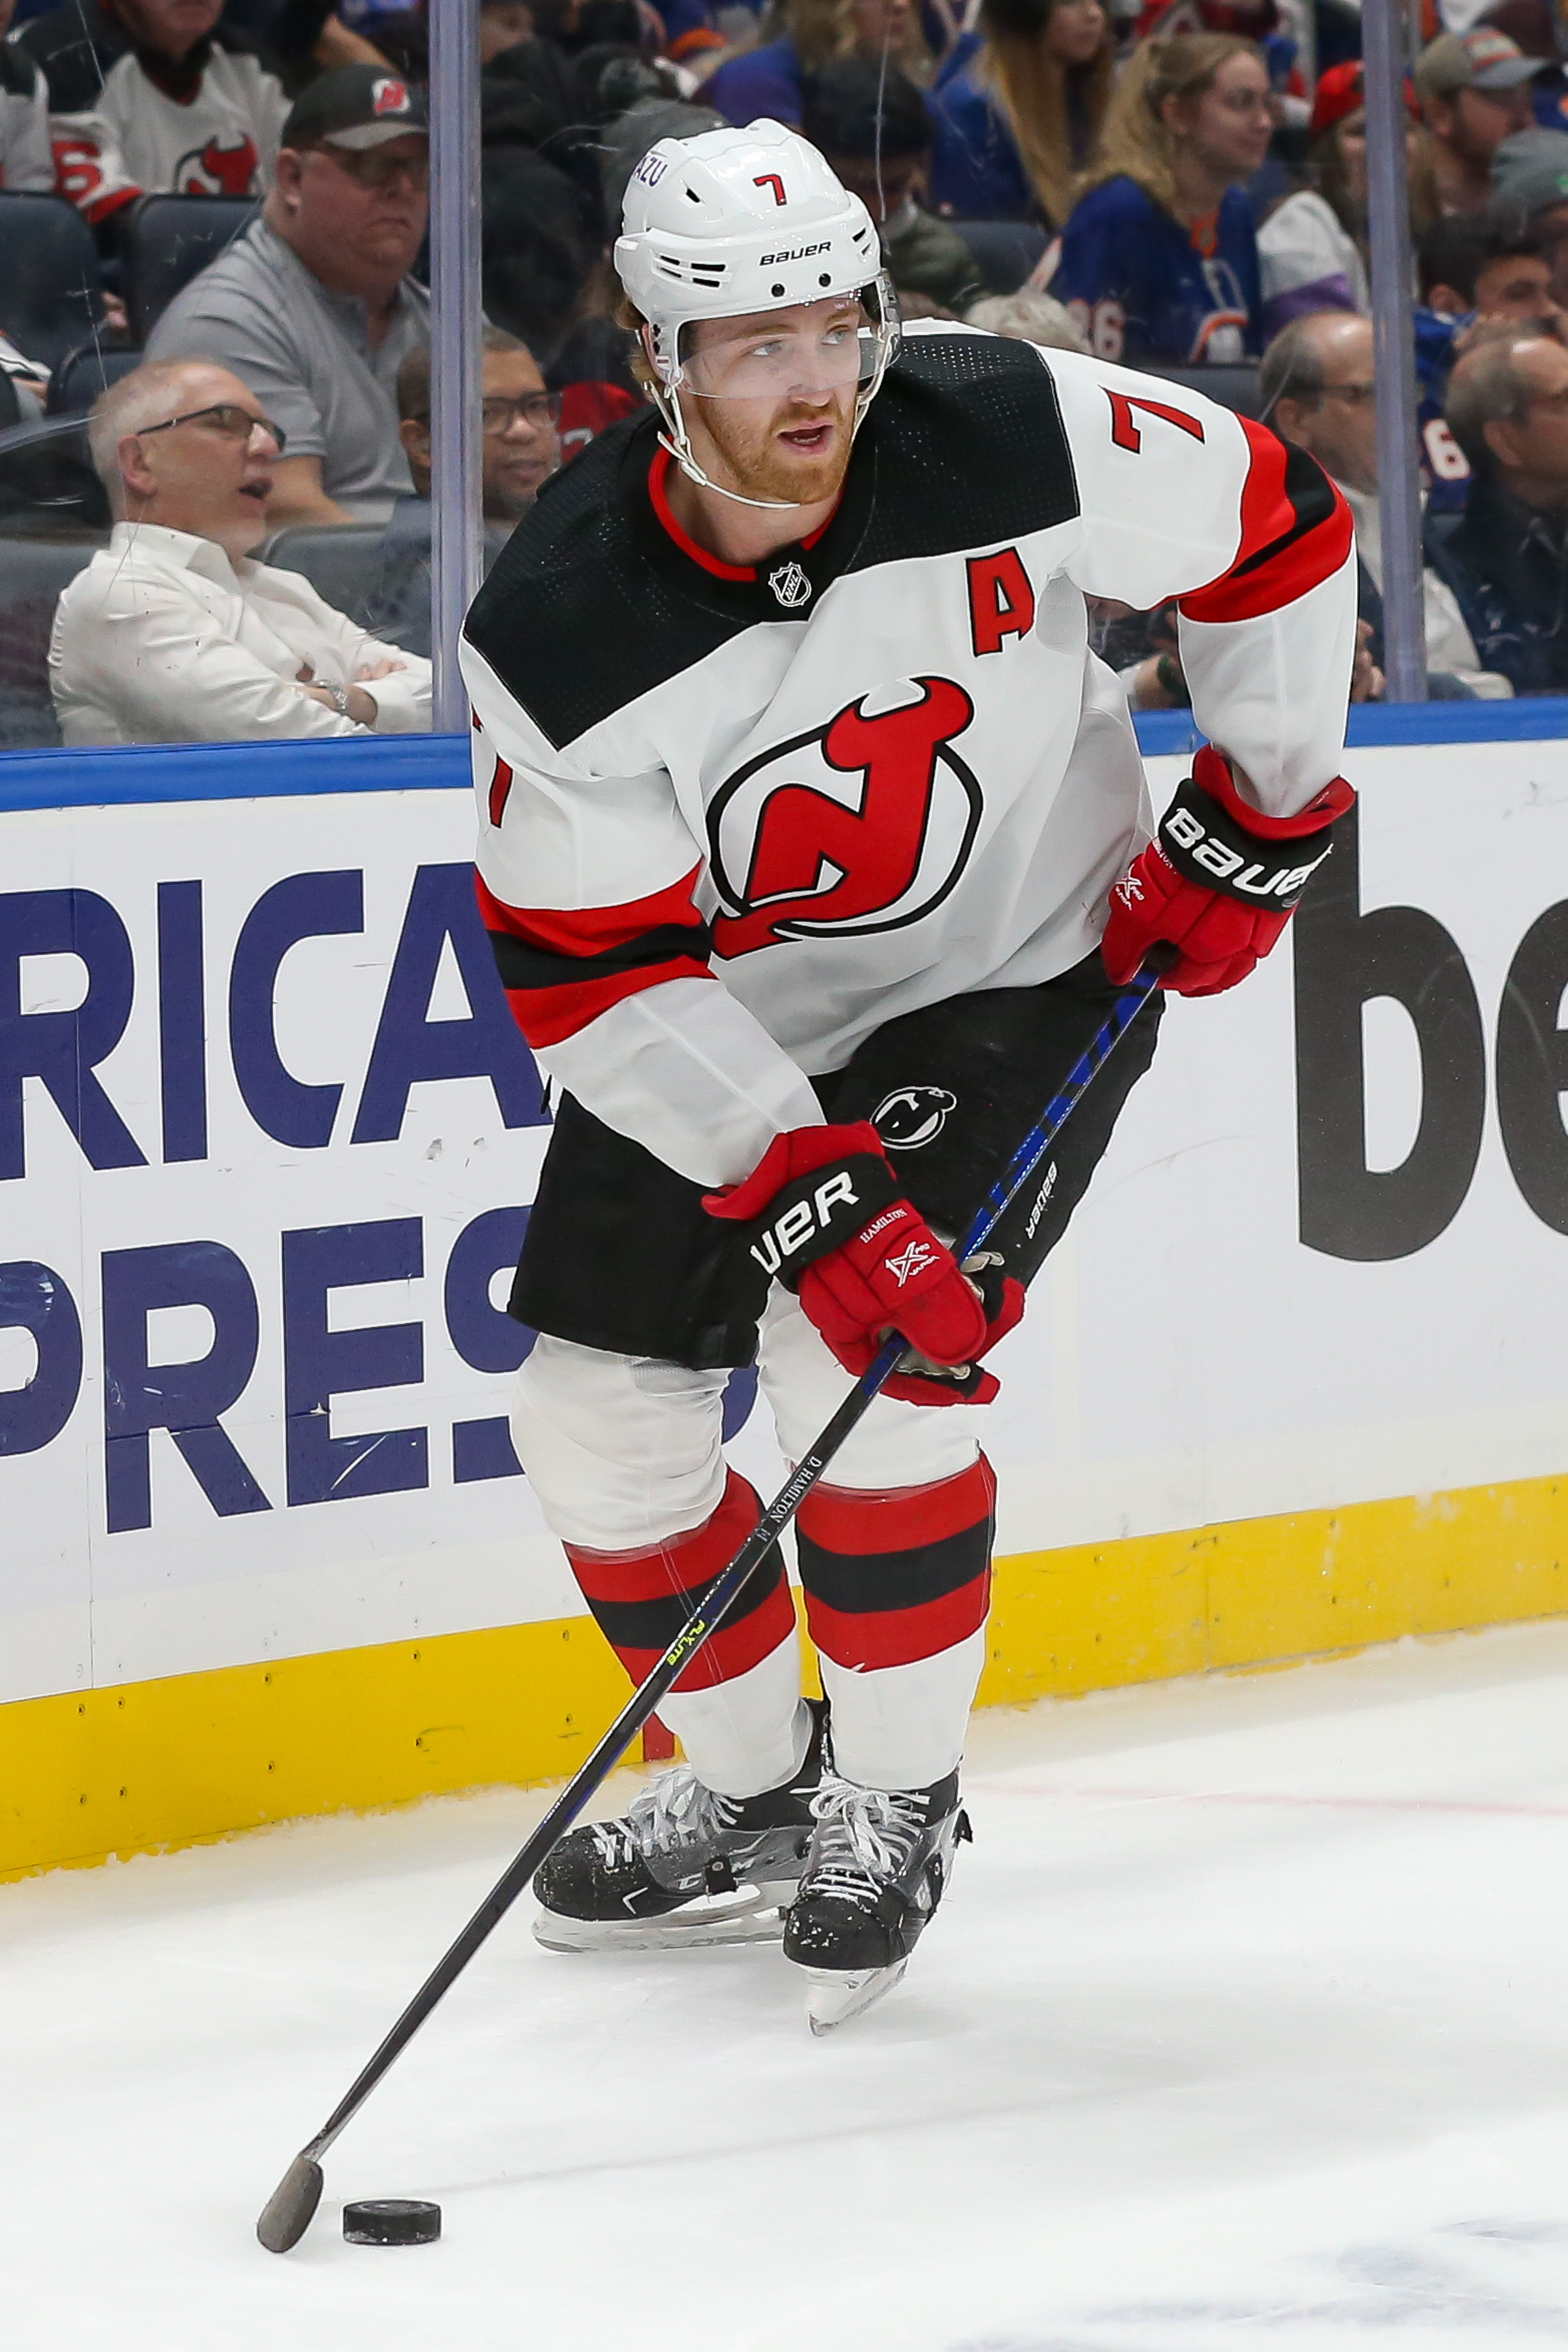 New Jersey Devils: One Major Issue Letting Graves and Severson Walk